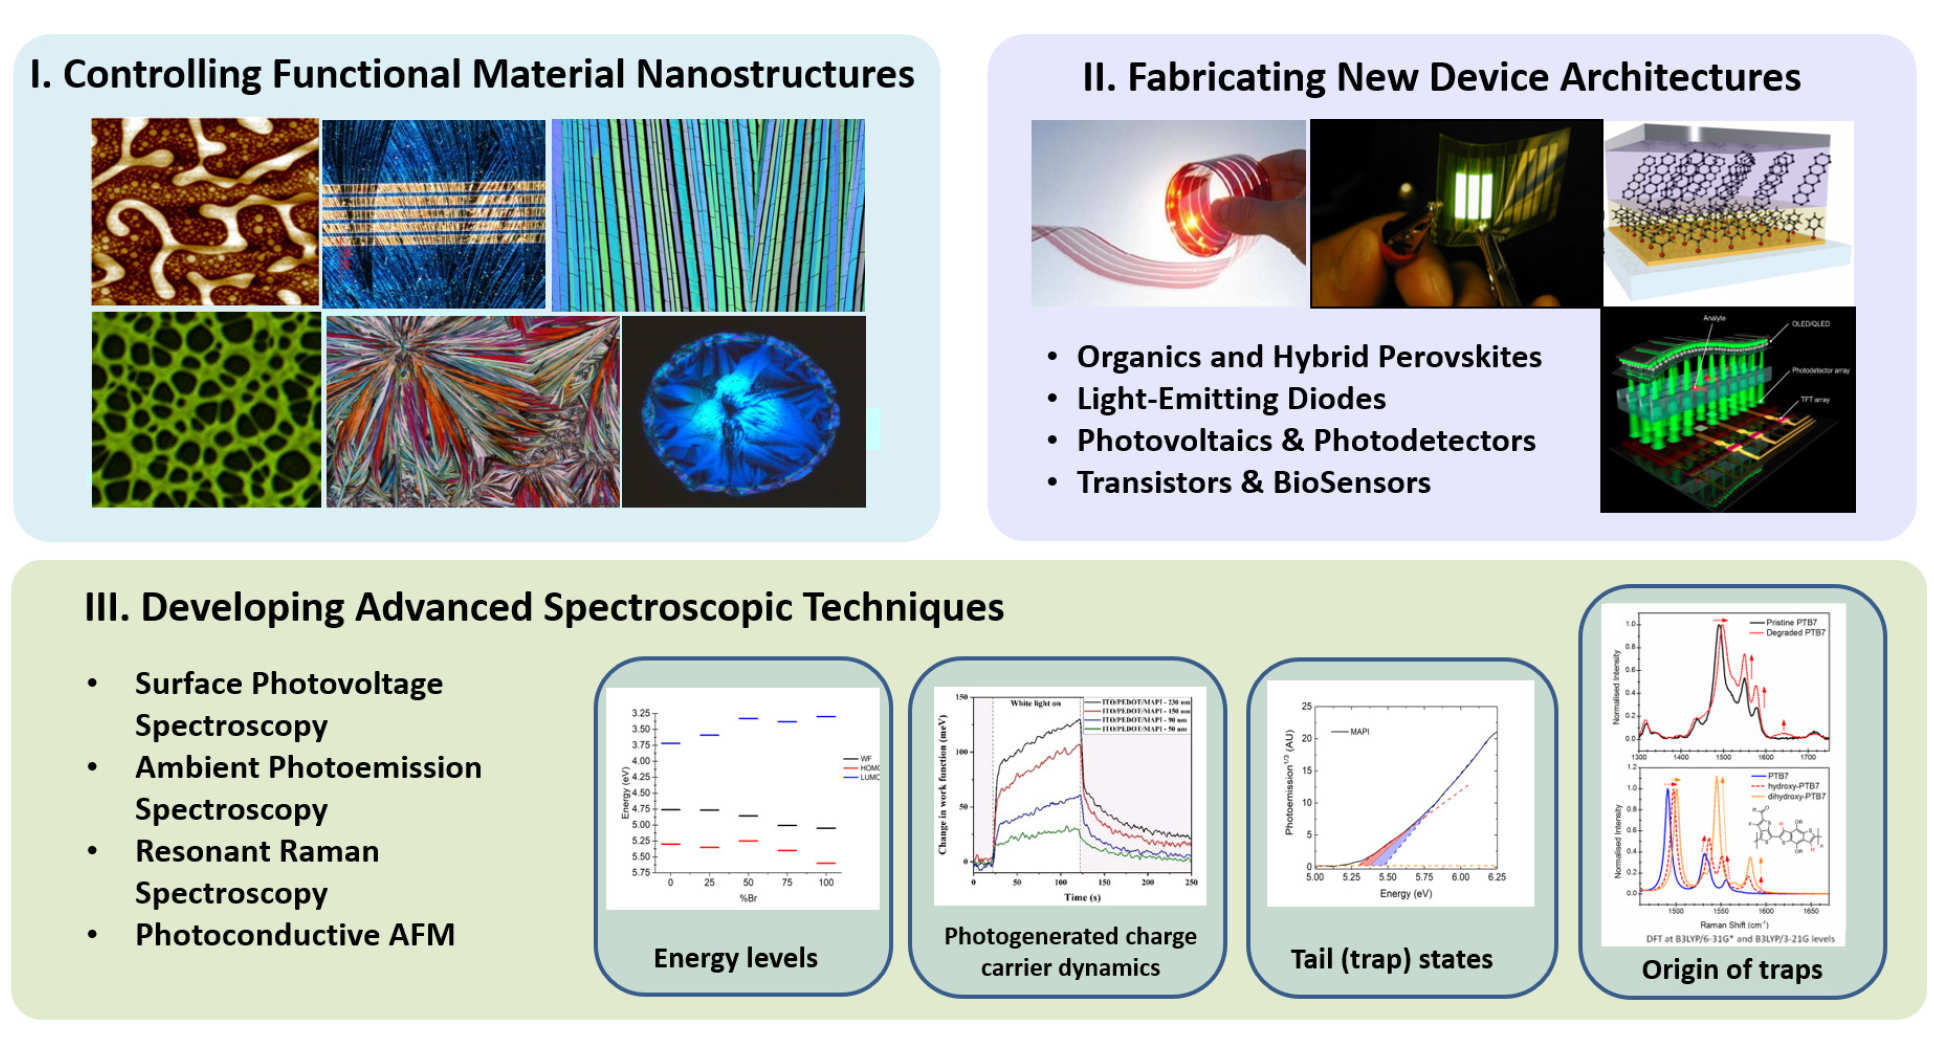 Controlling Functional Material Nanostructures, Fabricating New Device Archiitectures and Developing Advanced Spectroscopic Techniques 